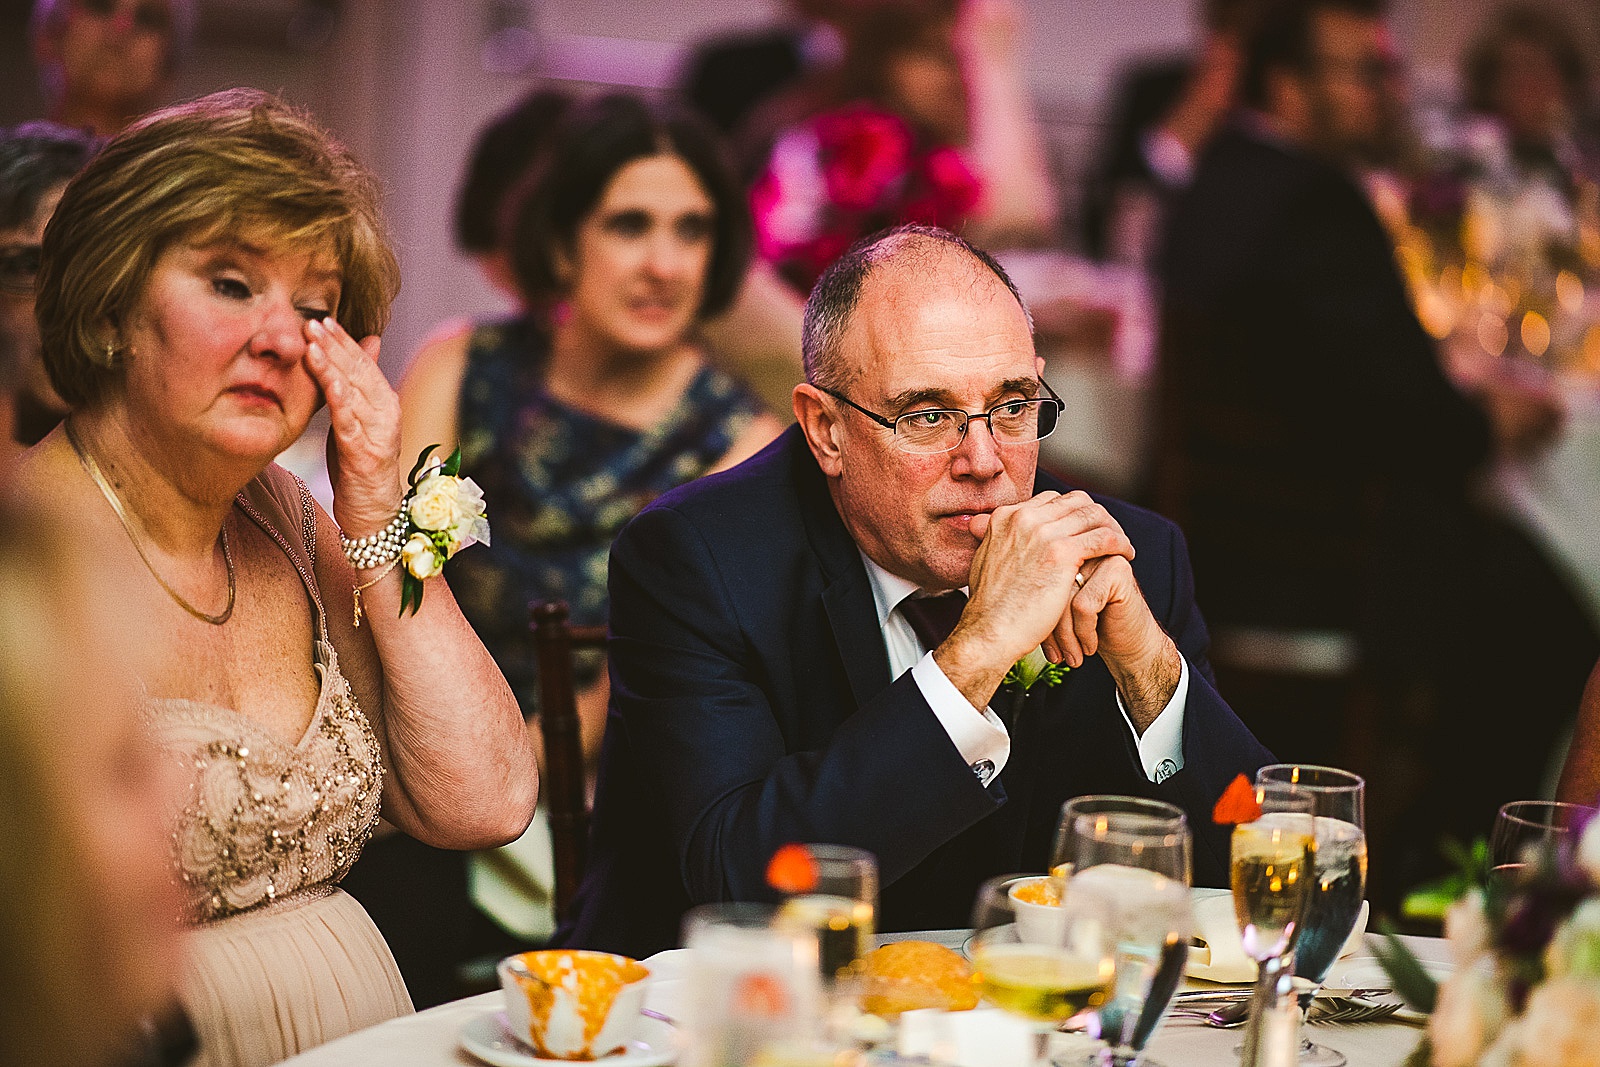 48 reactions and crying - The Glen Club Wedding Photos // Katie + Nick